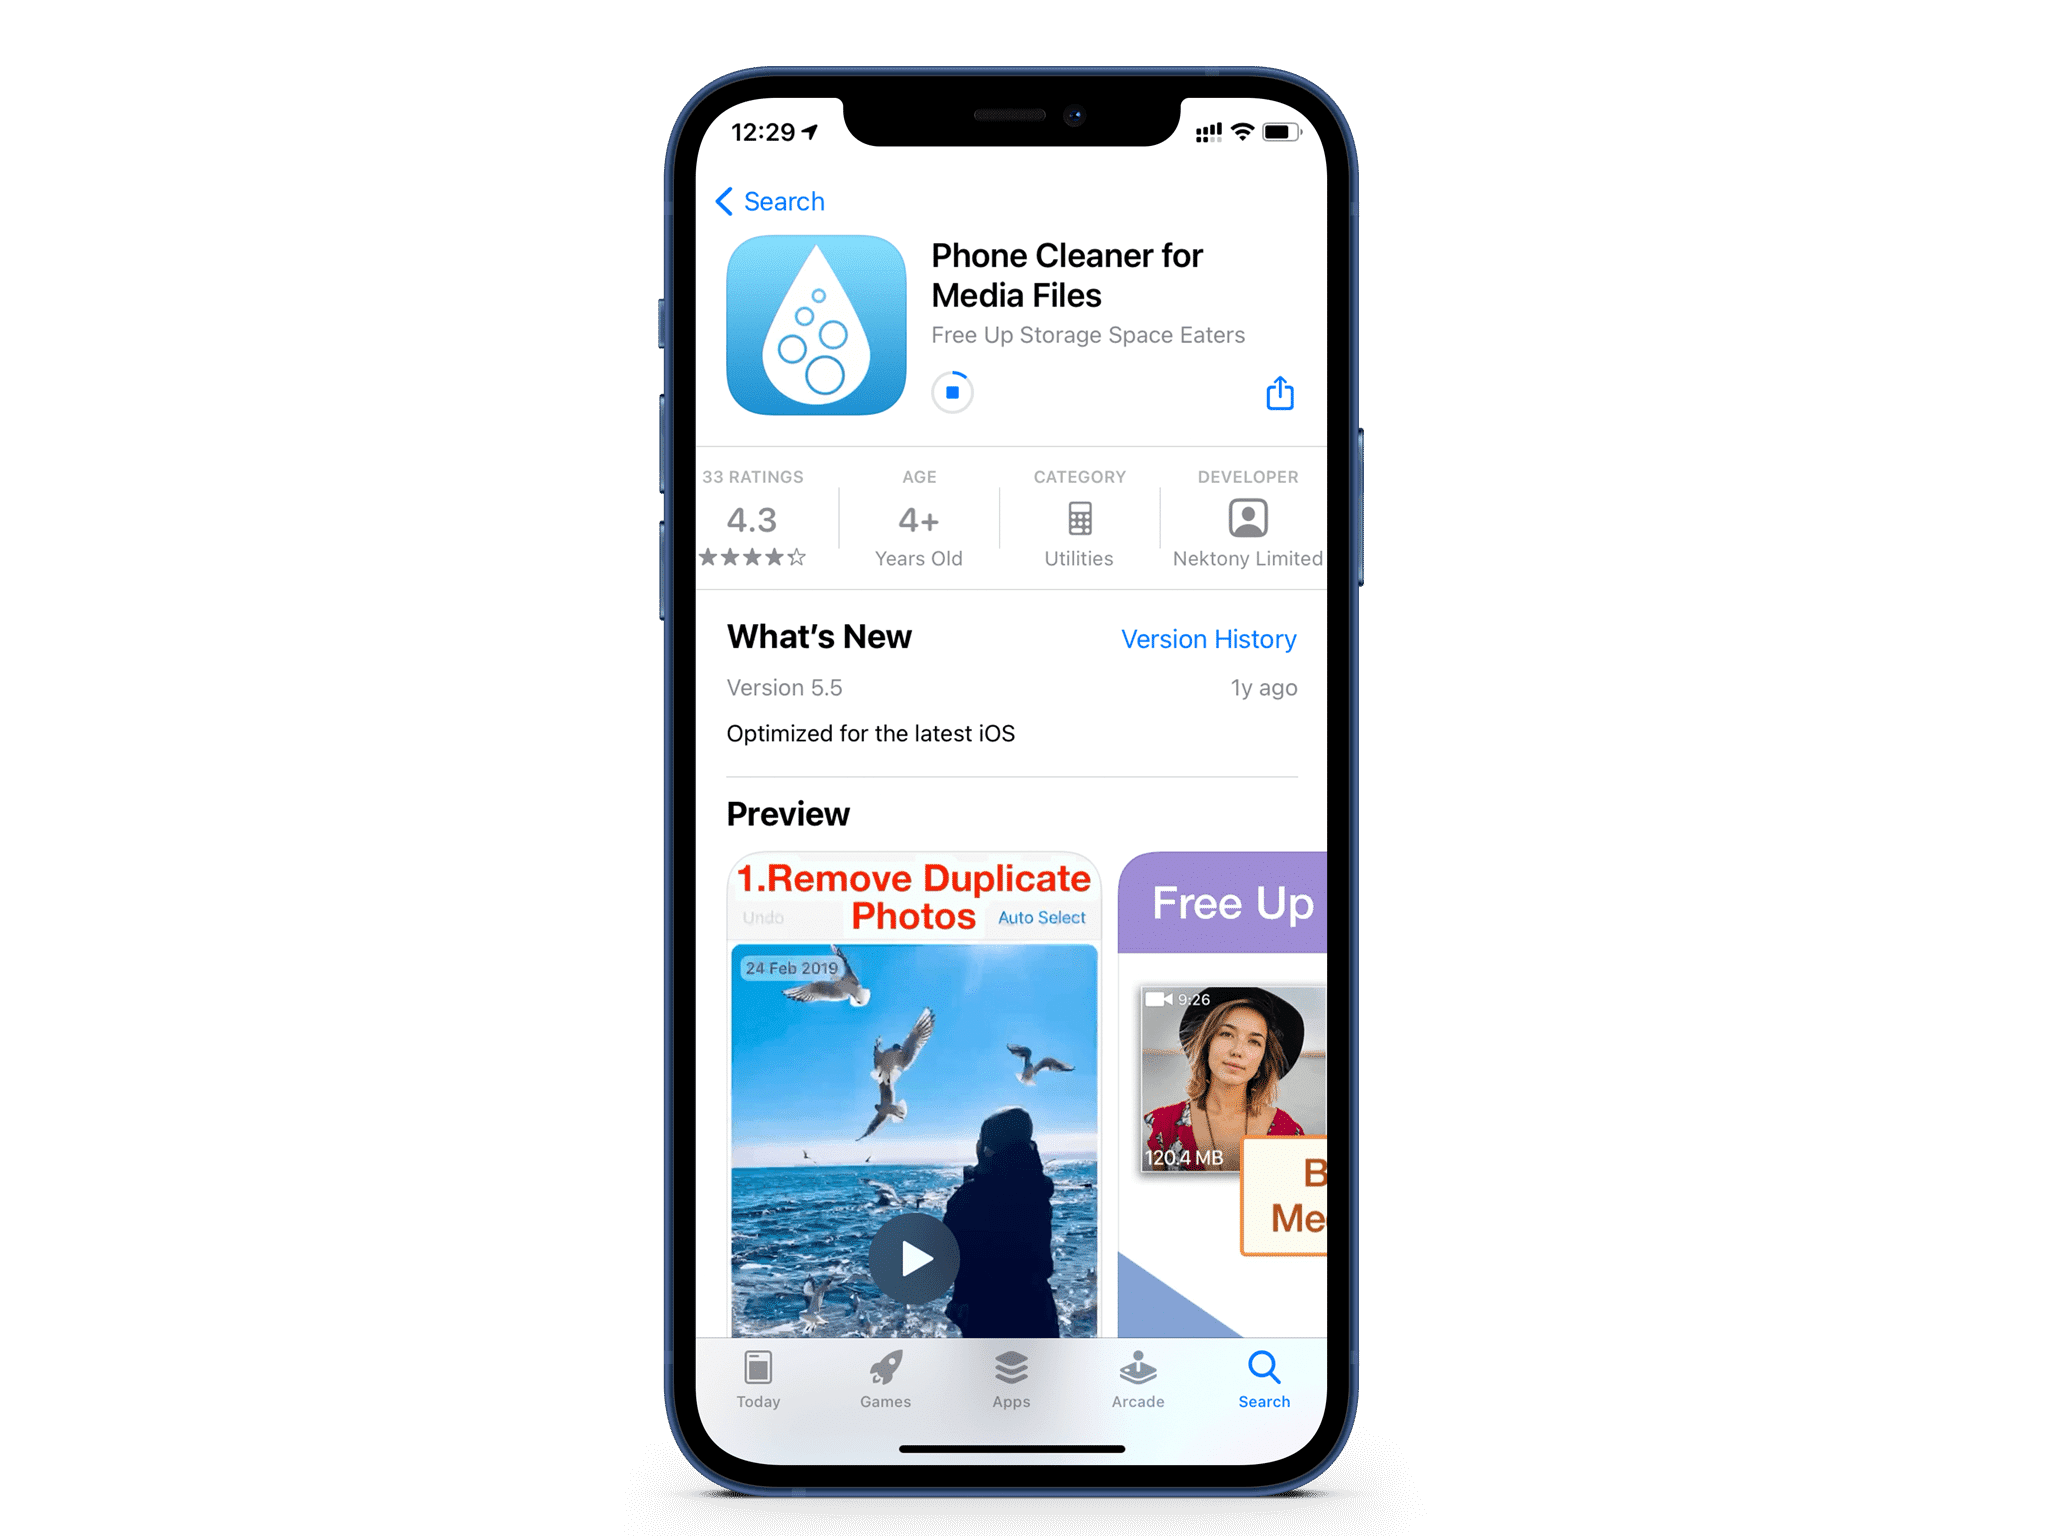 Phone Cleaner for media files in App Store